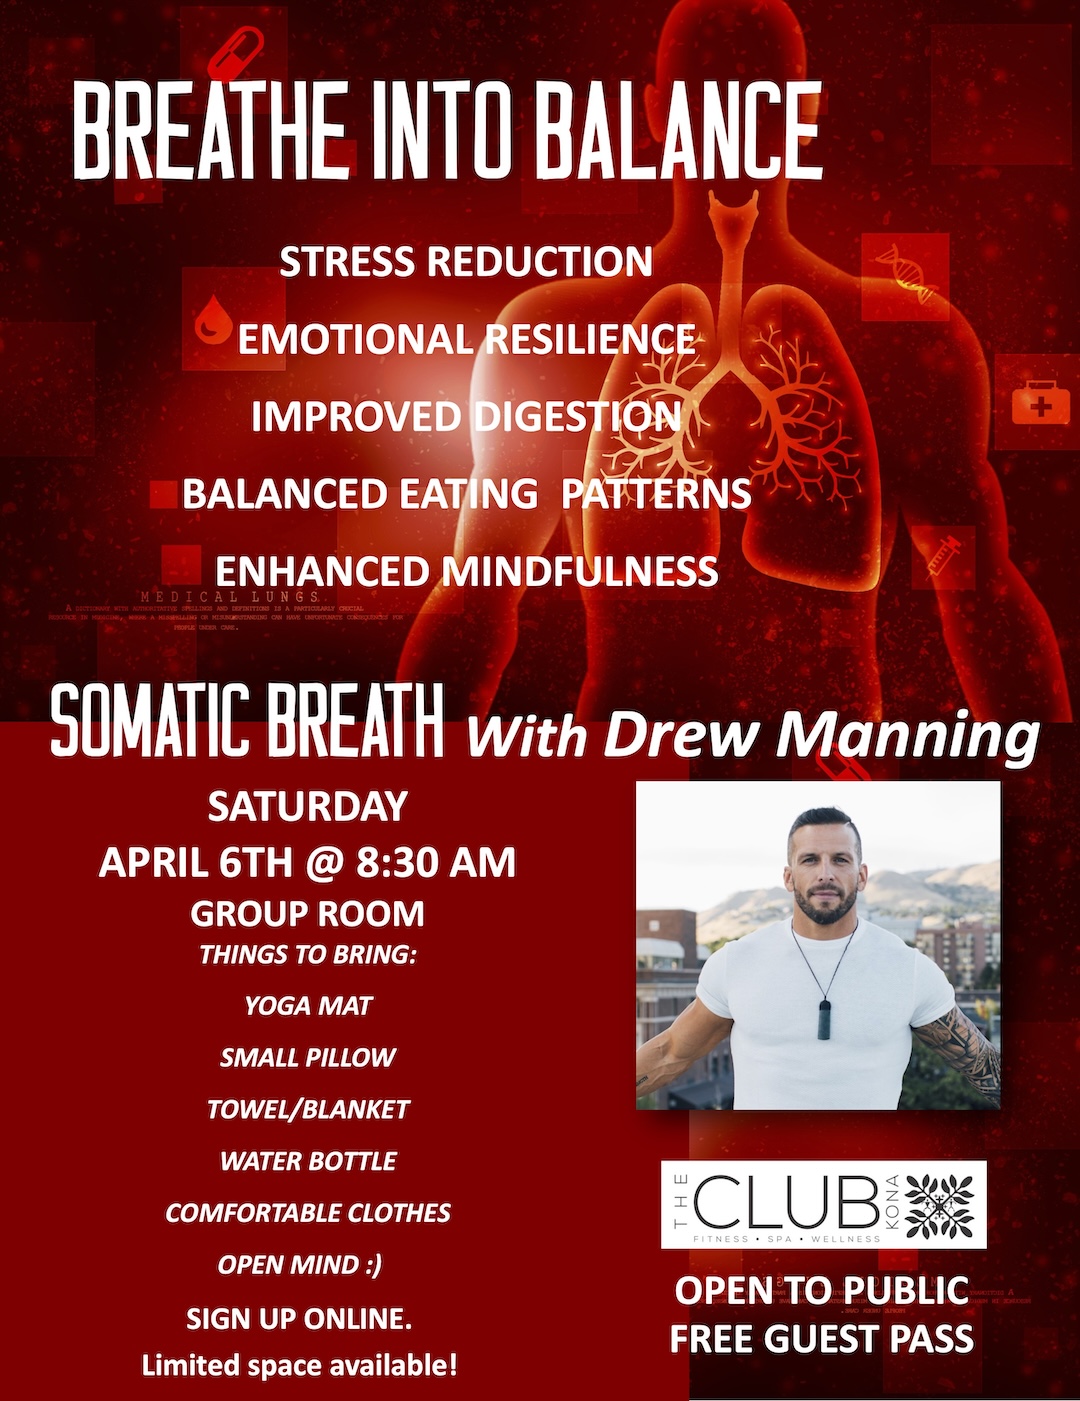 Somatic Breath with Drew Manning at The Club Kona